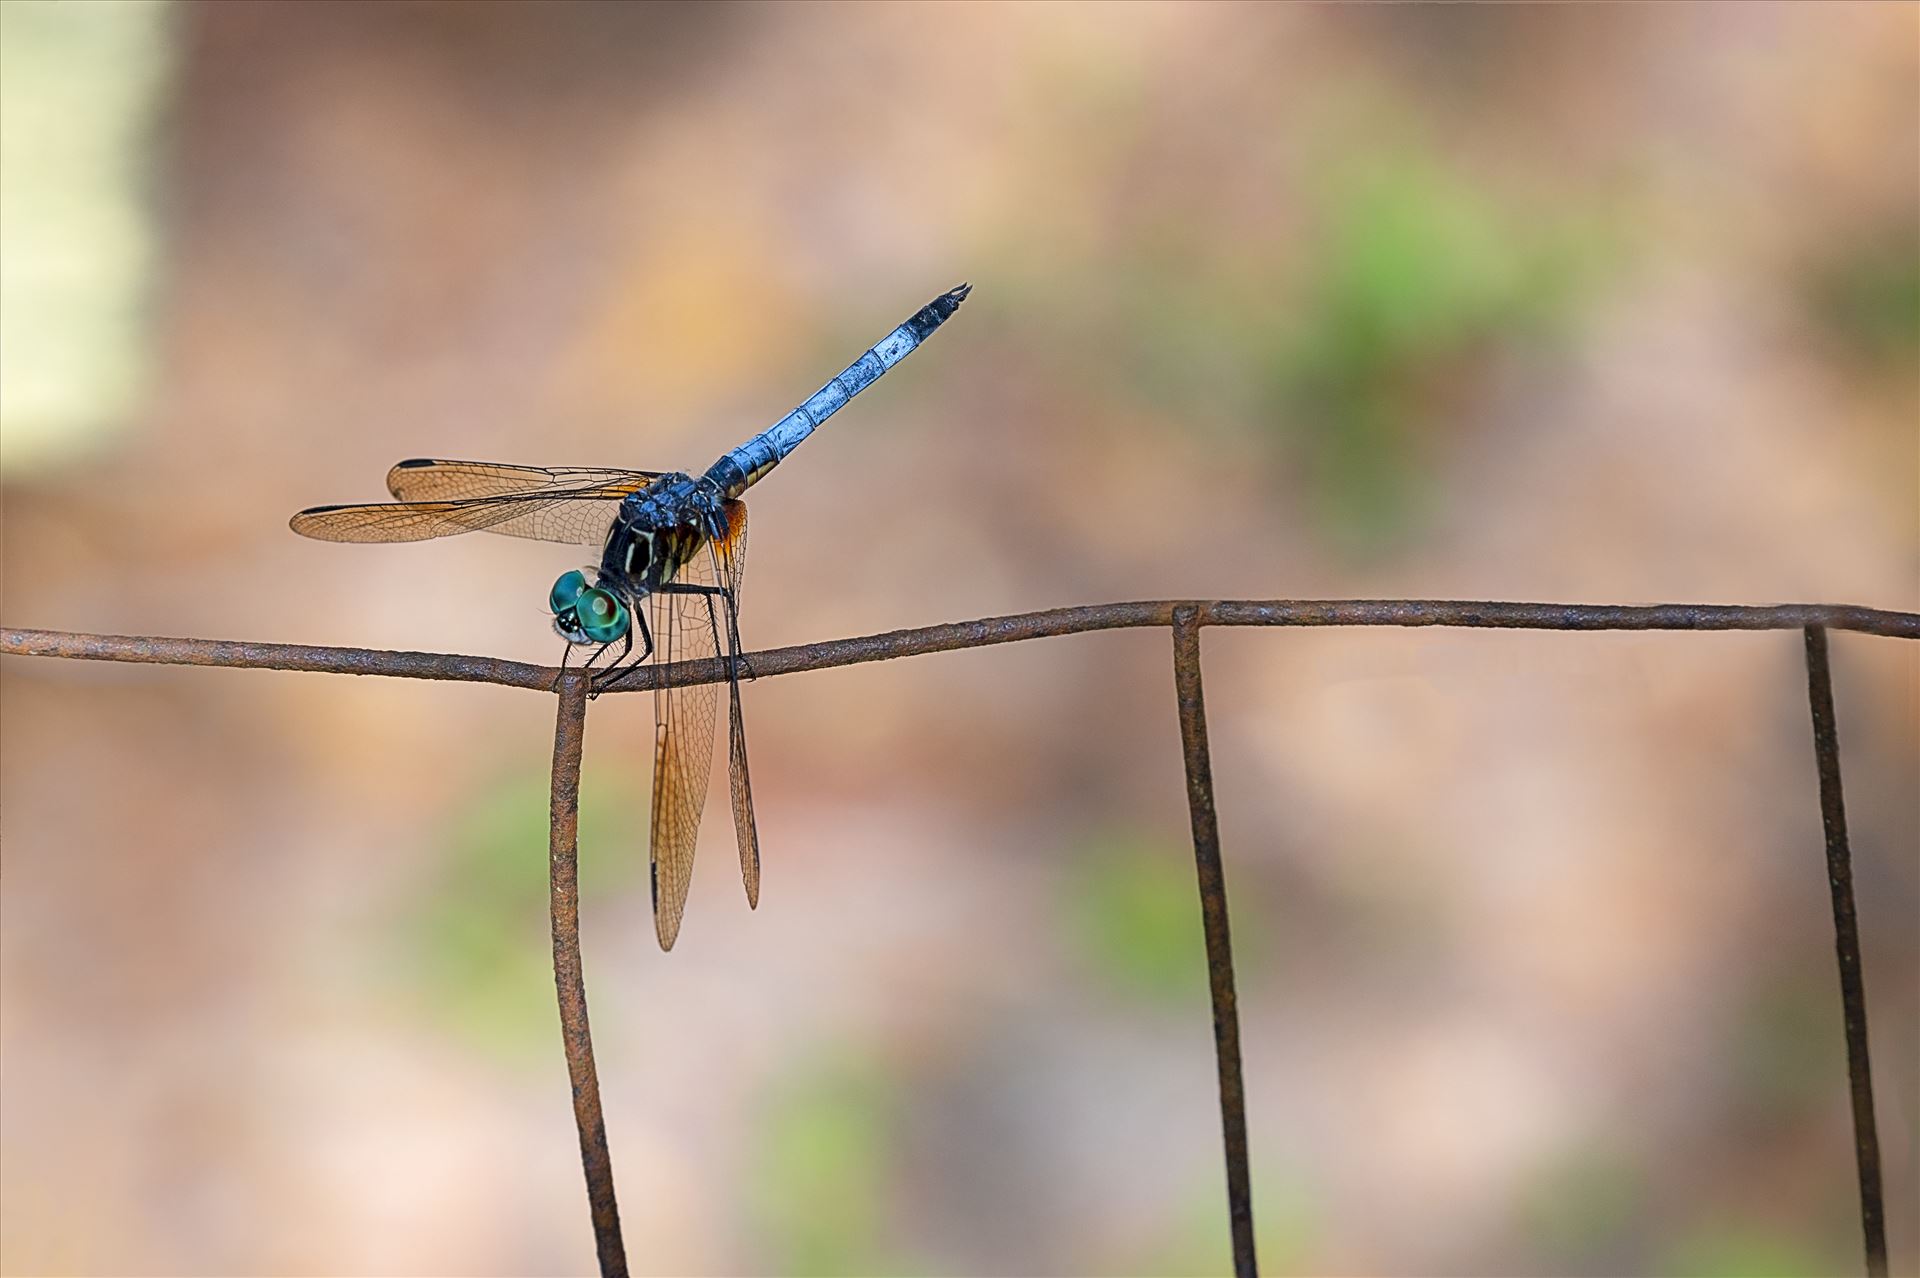 blue green dragonfly on rusted wire fence ss as 8500197.jpg close up macro photography of green and blue dragonfly that landed on an old rusty wire fence by Terry Kelly Photography